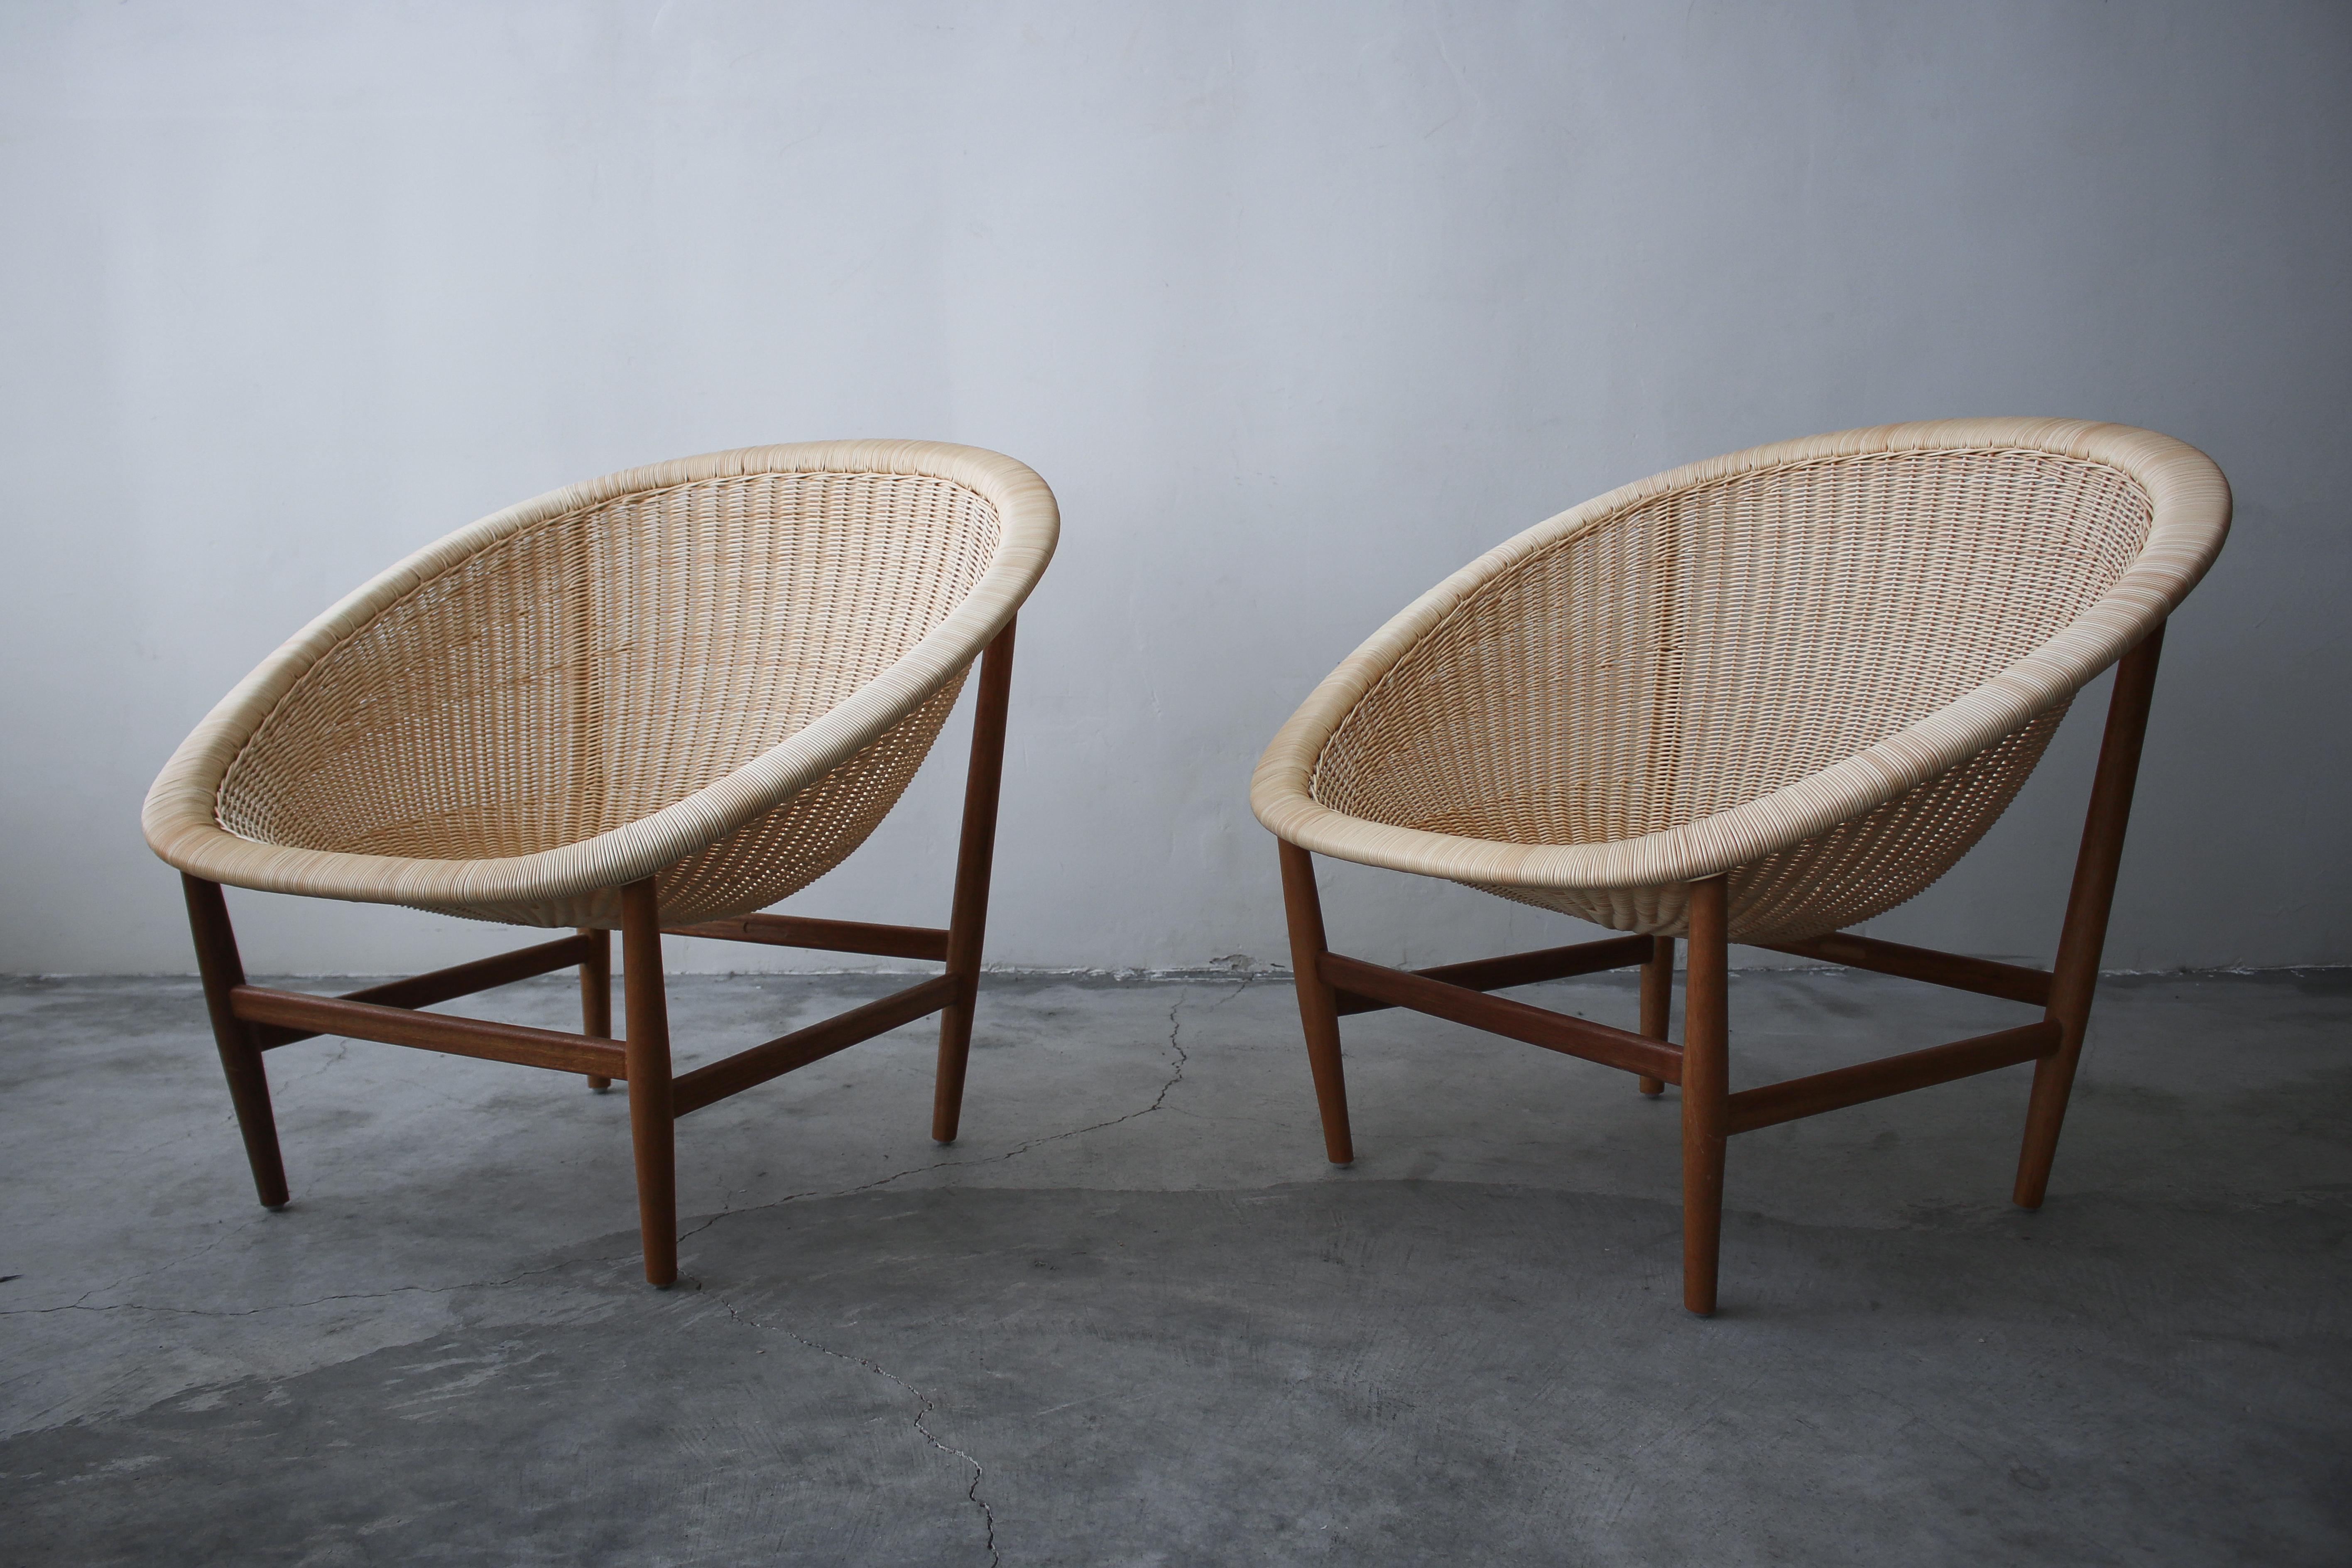 Designed by Nanna and Jørgen Ditzel in 1950, and edited and issued by Kettal in Barcelona Spain These beautiful Danish basket chairs are 1 of 2 designs issued by Kettal, this one designed for outdoor use is constructed of teak and artificial fibre